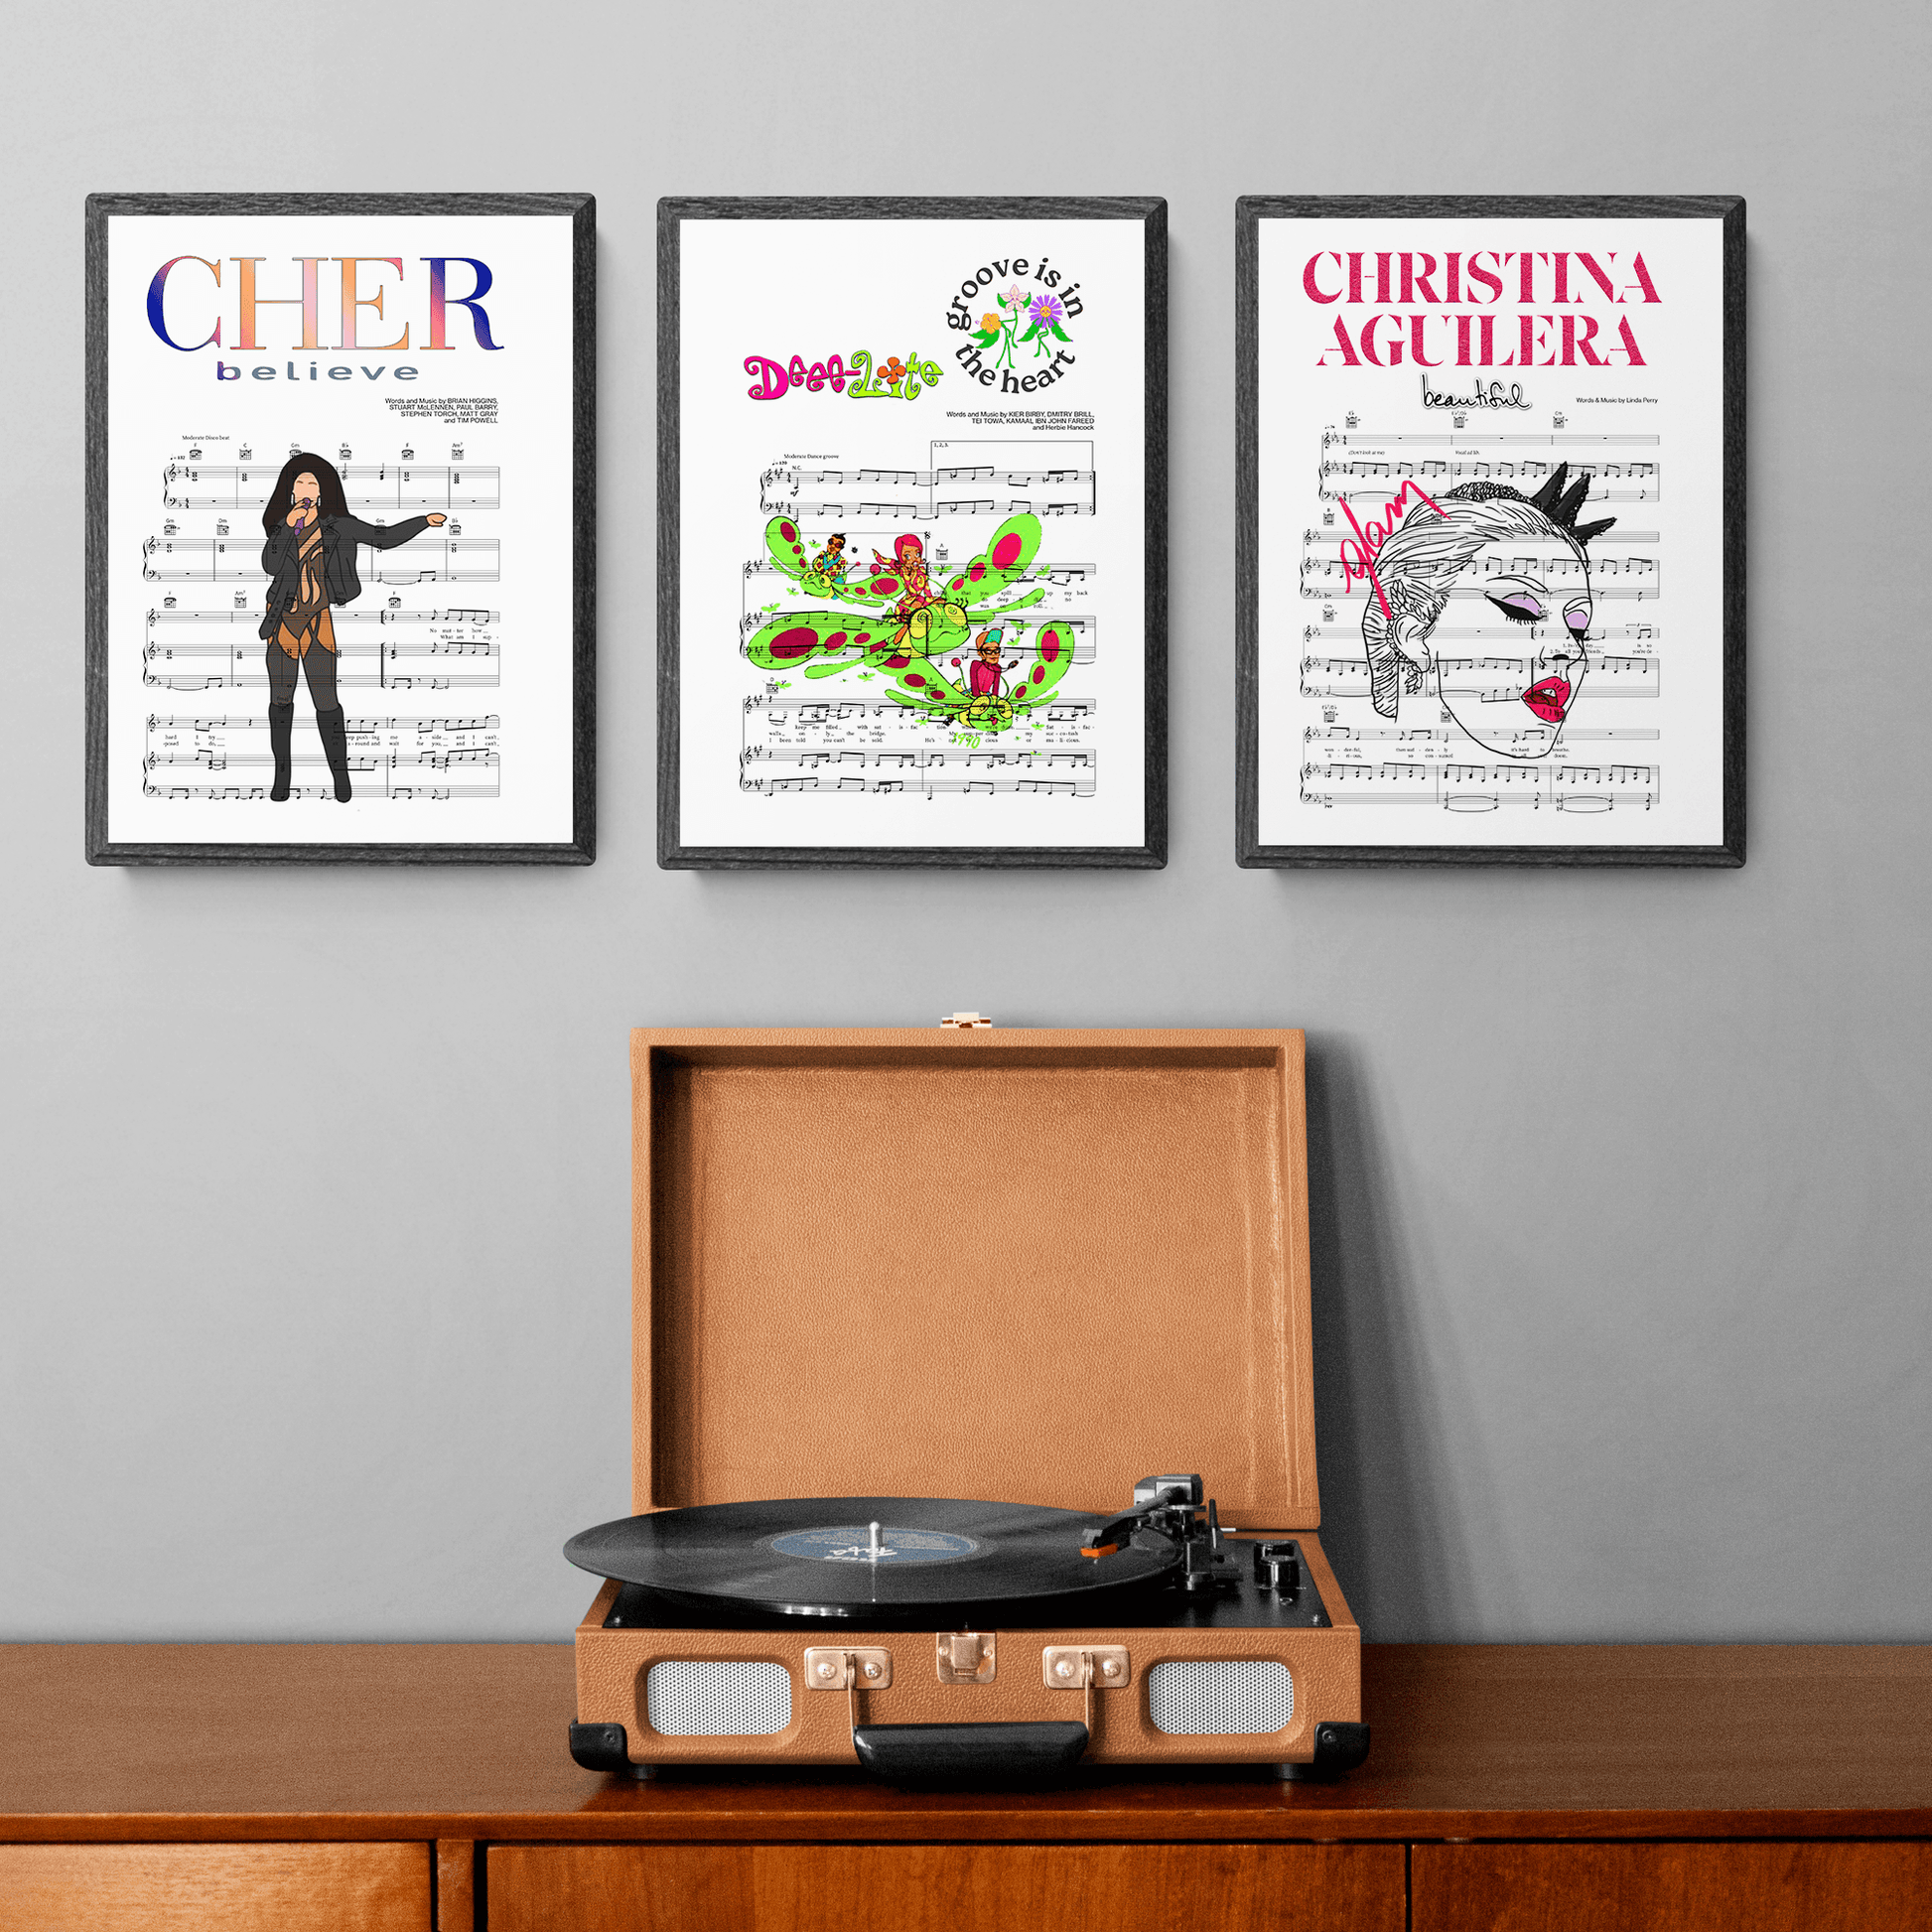 Put a little funk in your home decor with this premium Deee-Lite - Groove Is in the Heart poster. Our high quality wall art print features a stylish design that's perfect for spicing up any kitchen or livingroom. Make a statement and show everyone you're a fan of the classic track with this great gift for any occasion.